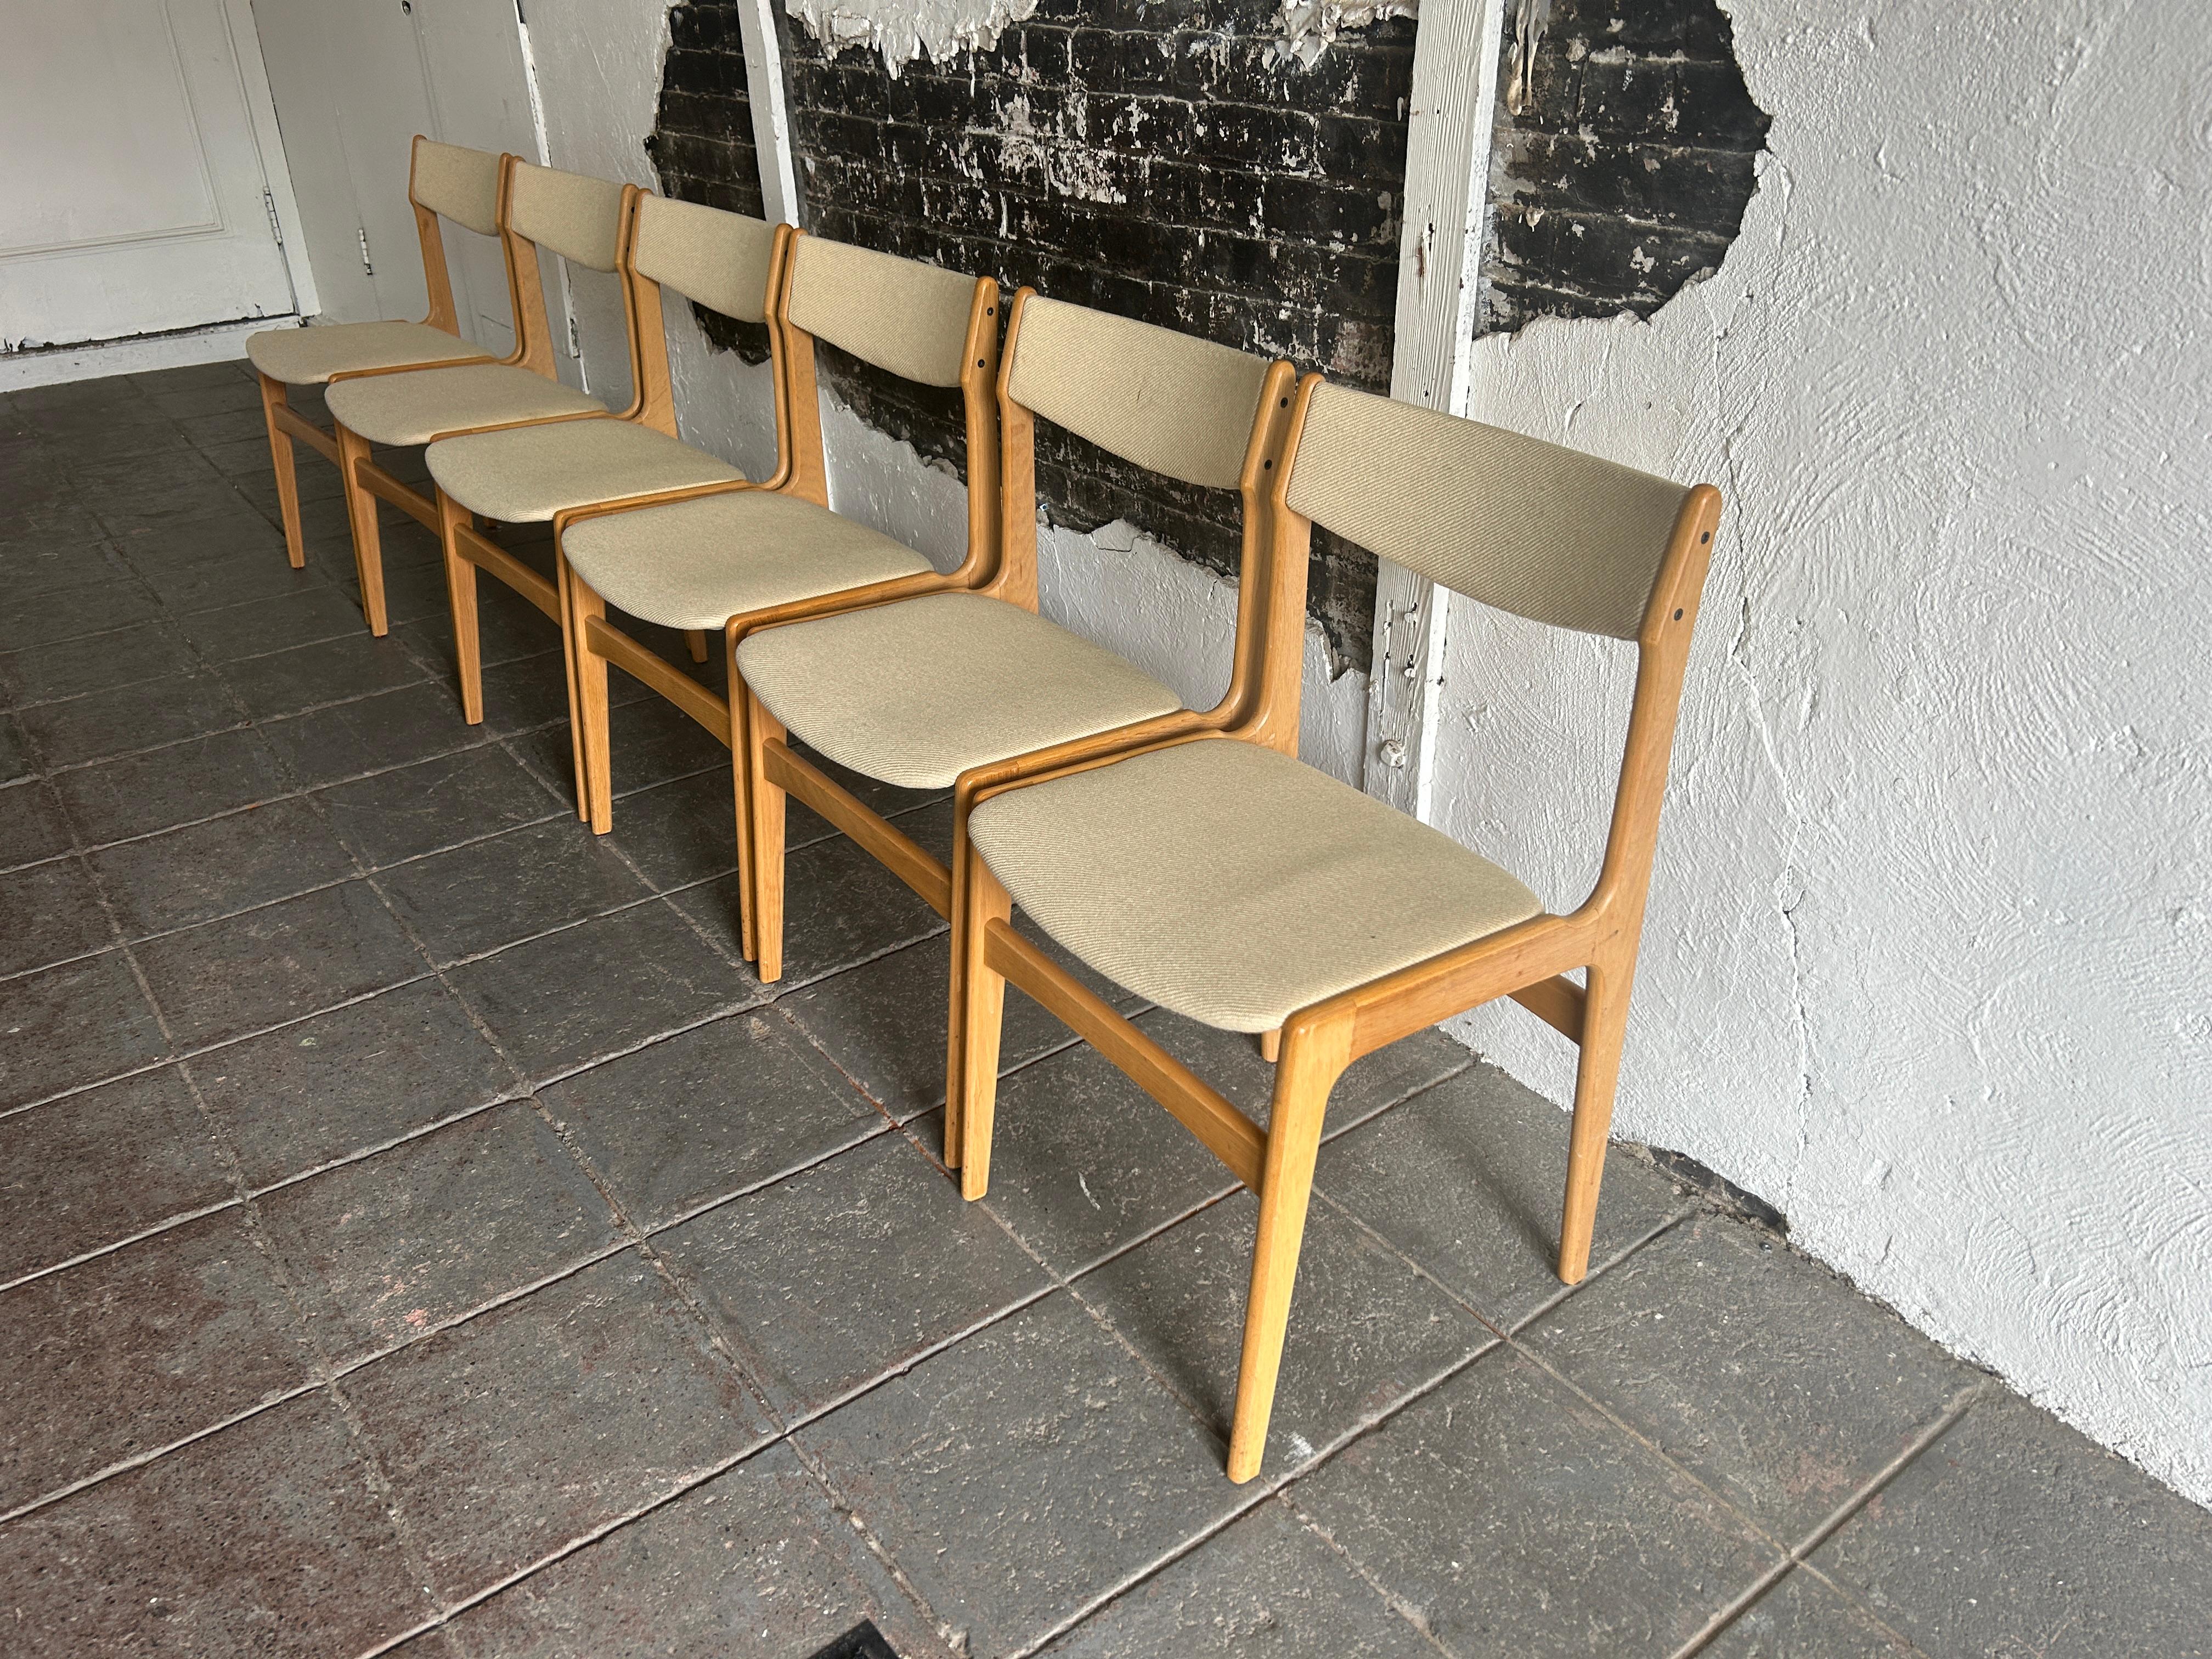 Set of 6 Danish modern white oak dining chairs tan upholstery. Beautiful light muted white oak wood Scandinavian modern set of dining chairs. Has tan woven upholstery in very good condition. Chairs are ready for use in great condition all very